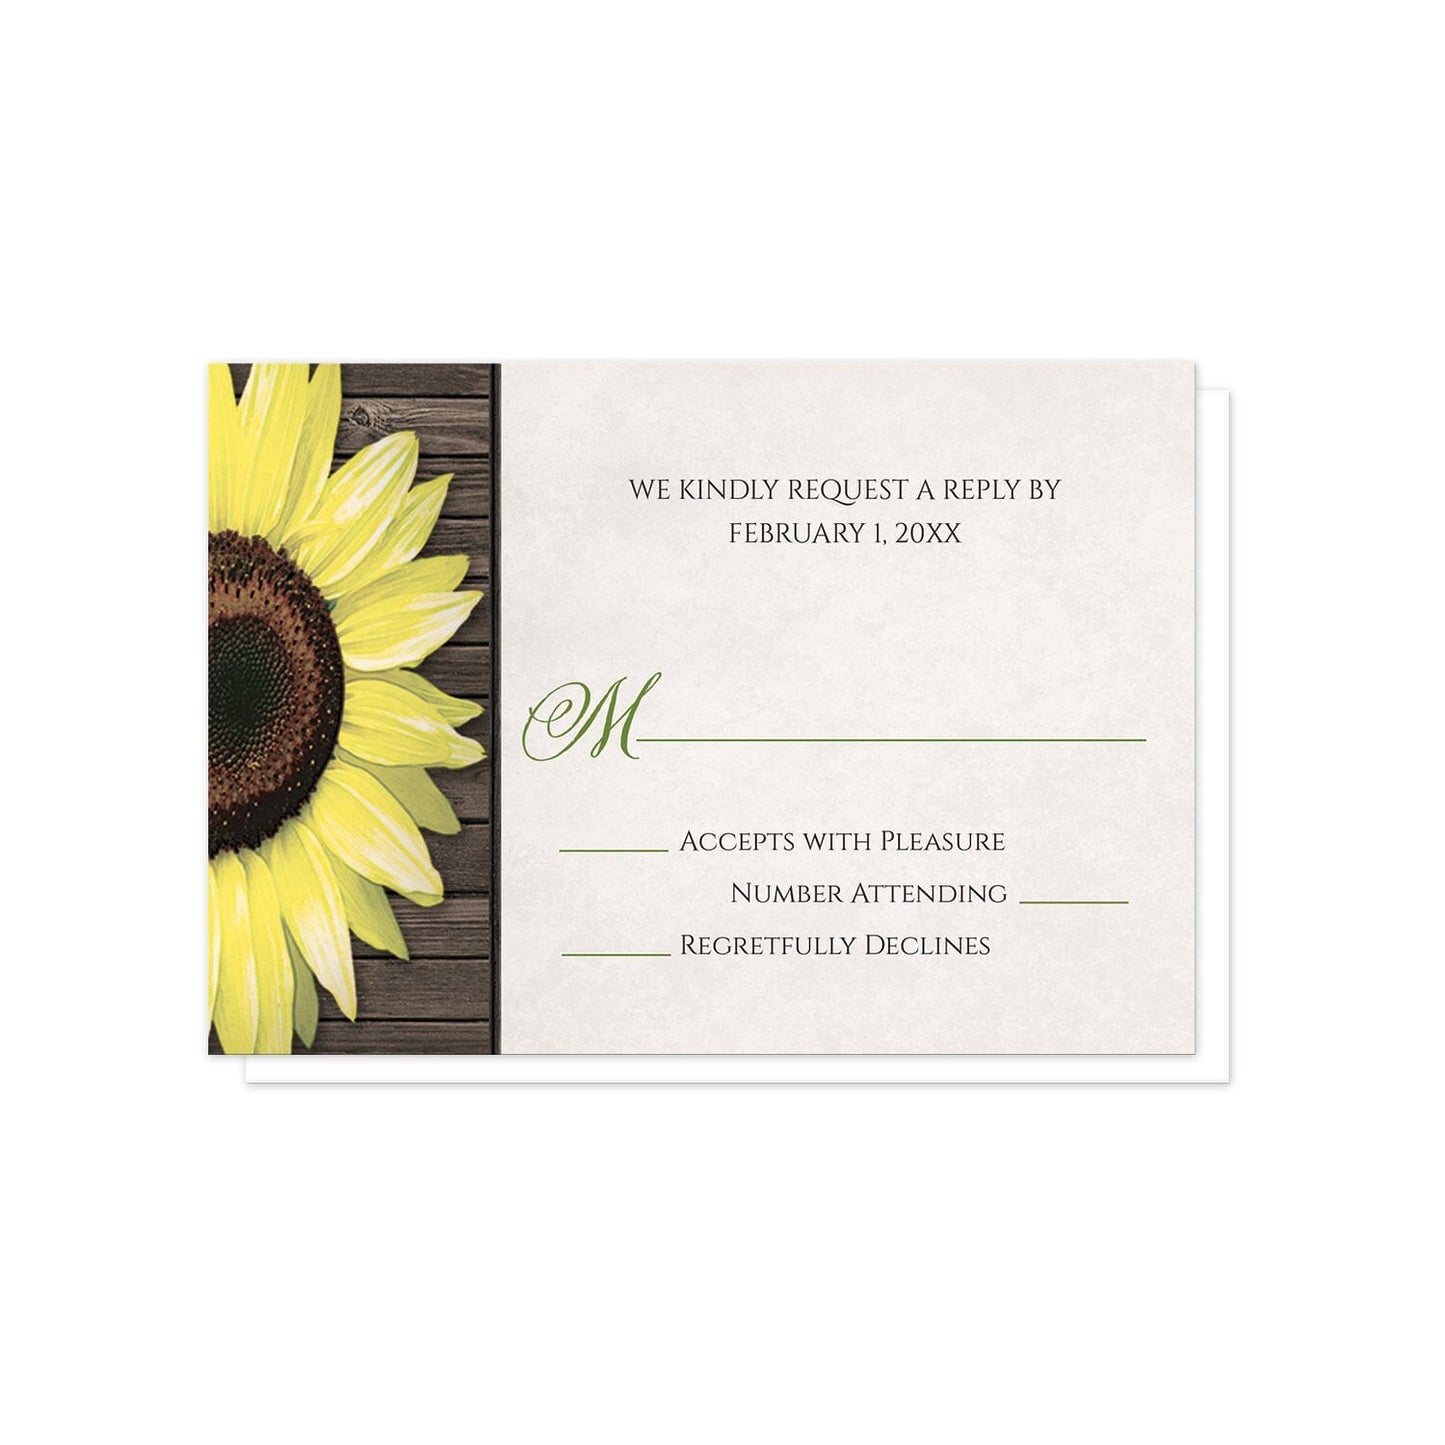 Rustic Burlap and Lace Tin Can Sunflower RSVP Cards at Artistically Invited.